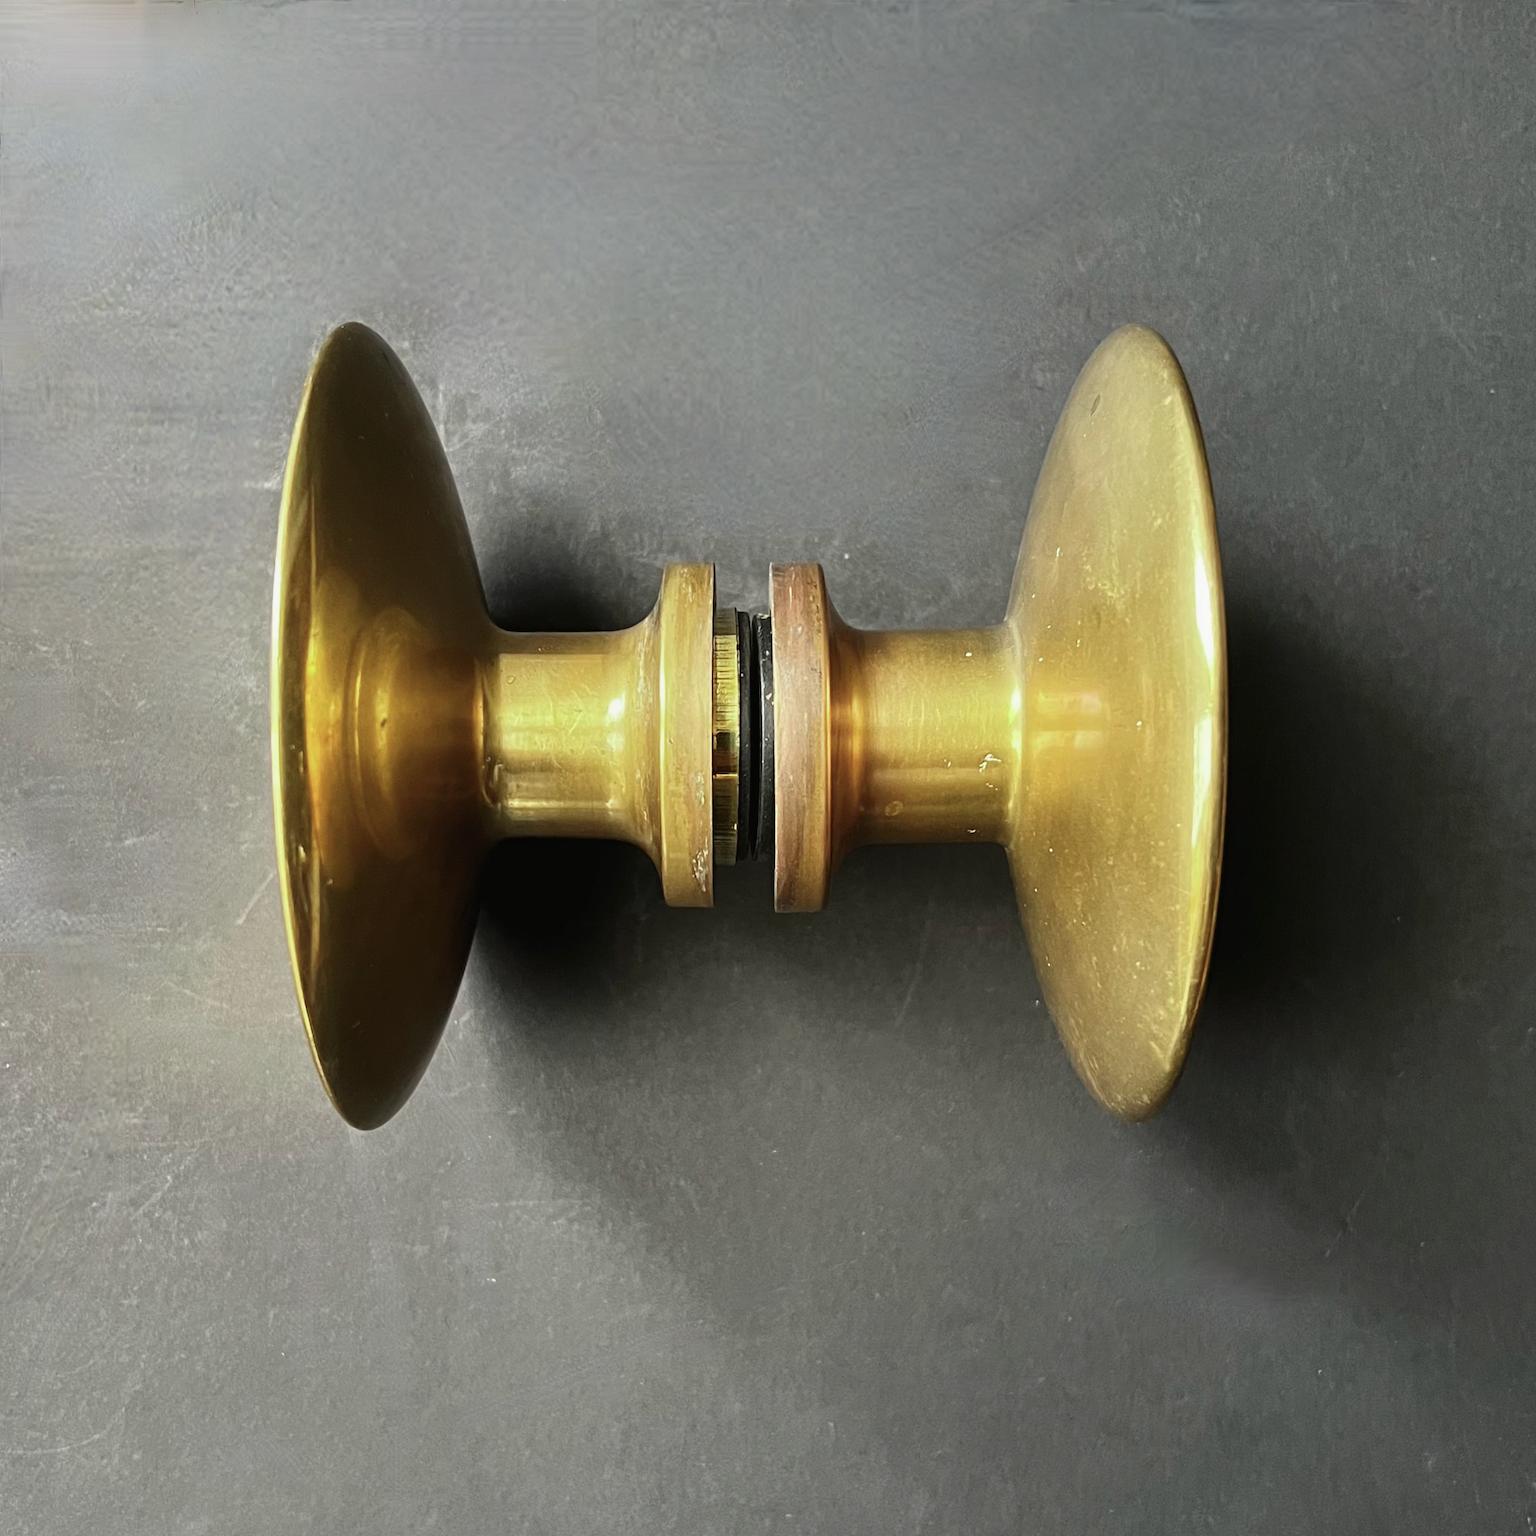 French Circular Push-and-Pull Door Handle in Bronze, Mid-20th Century, France [I] For Sale